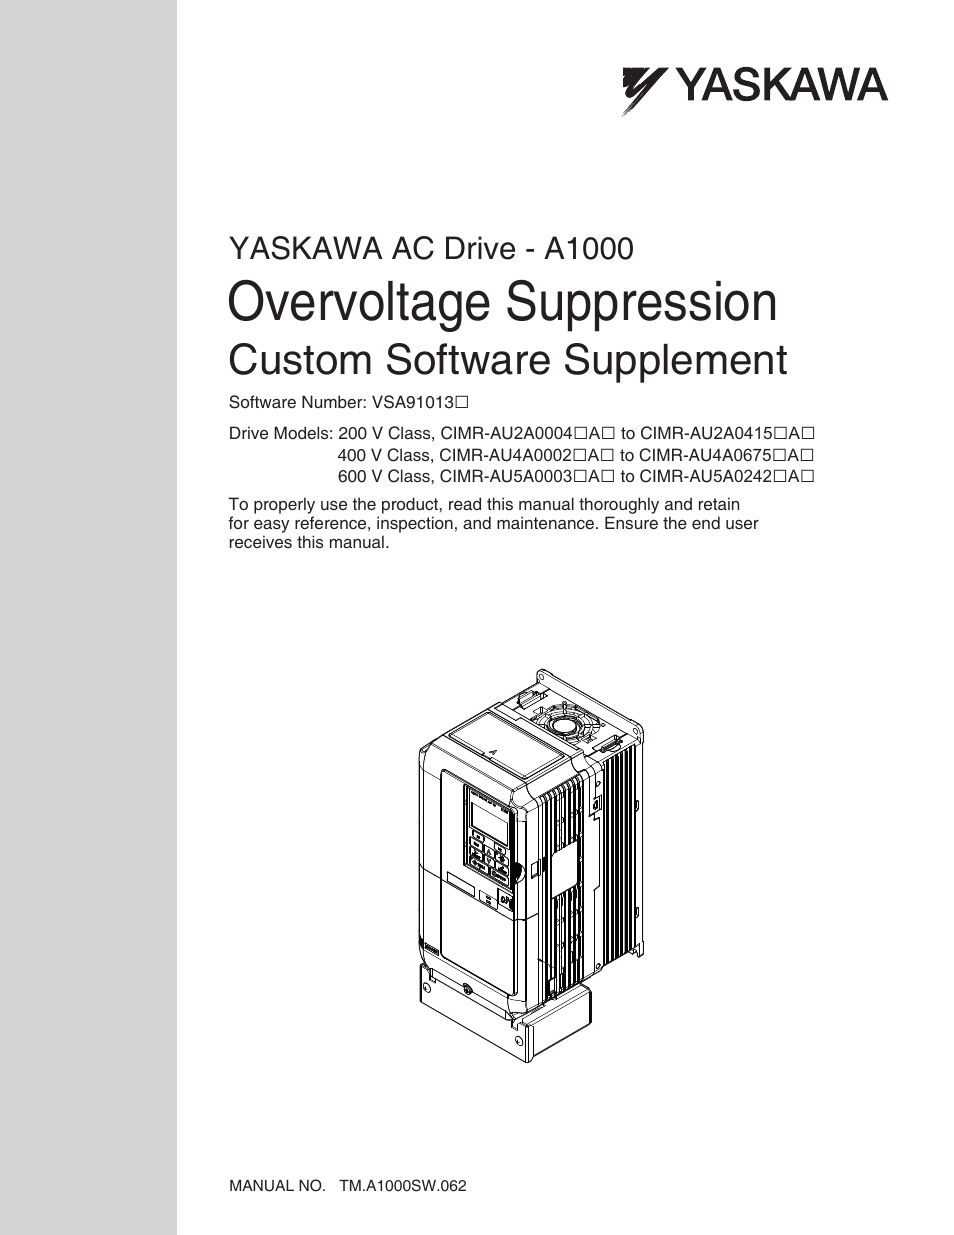 A1000 Drive Software Technical Manual